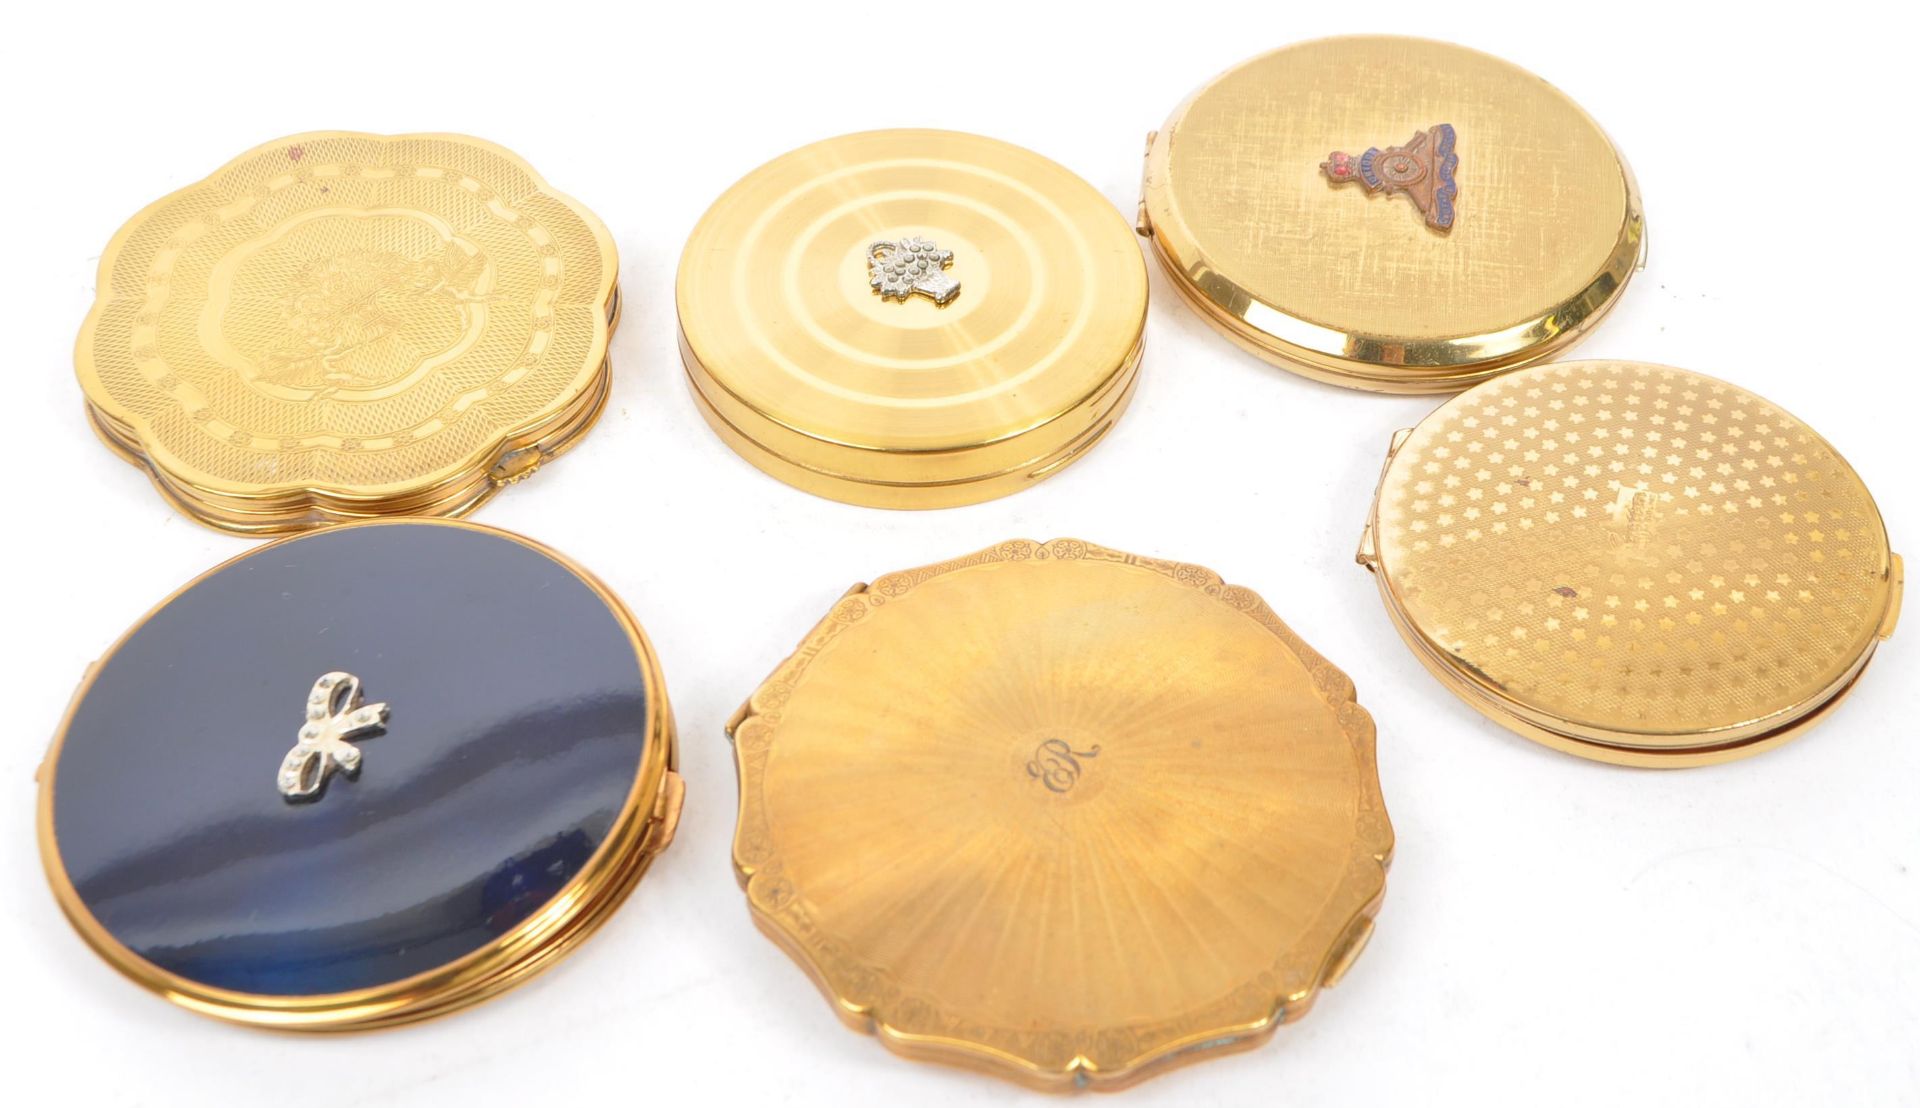 COLLECTION OF VINTAGE VANITY COMPACTS - STRATTON - MAGARET ROSE